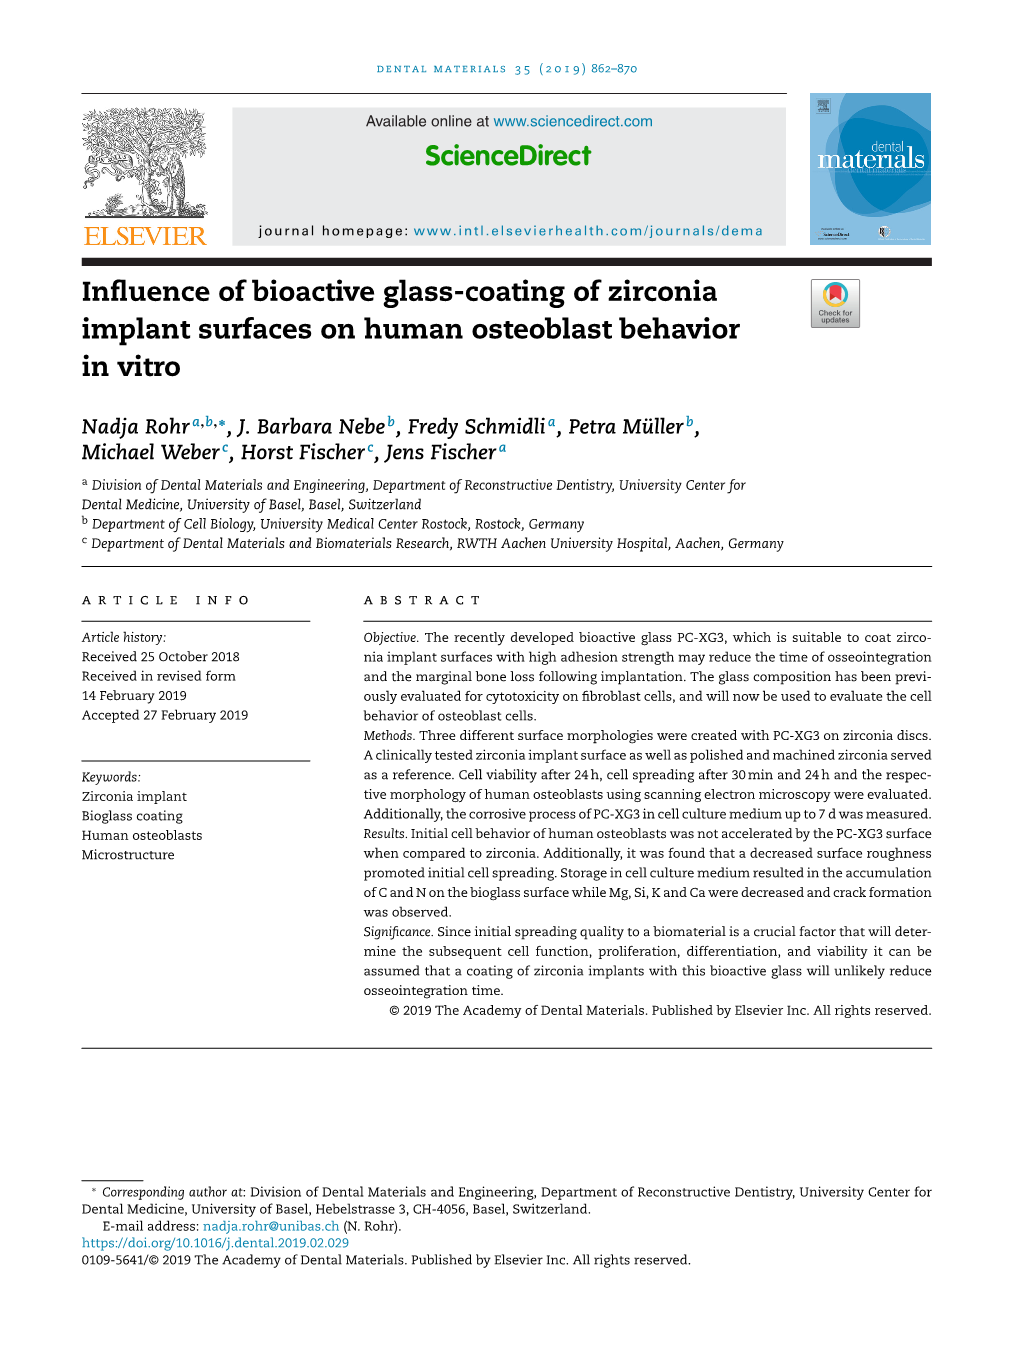 Influence of Bioactive Glass-Coating of Zirconia Implant Surfaces on Human